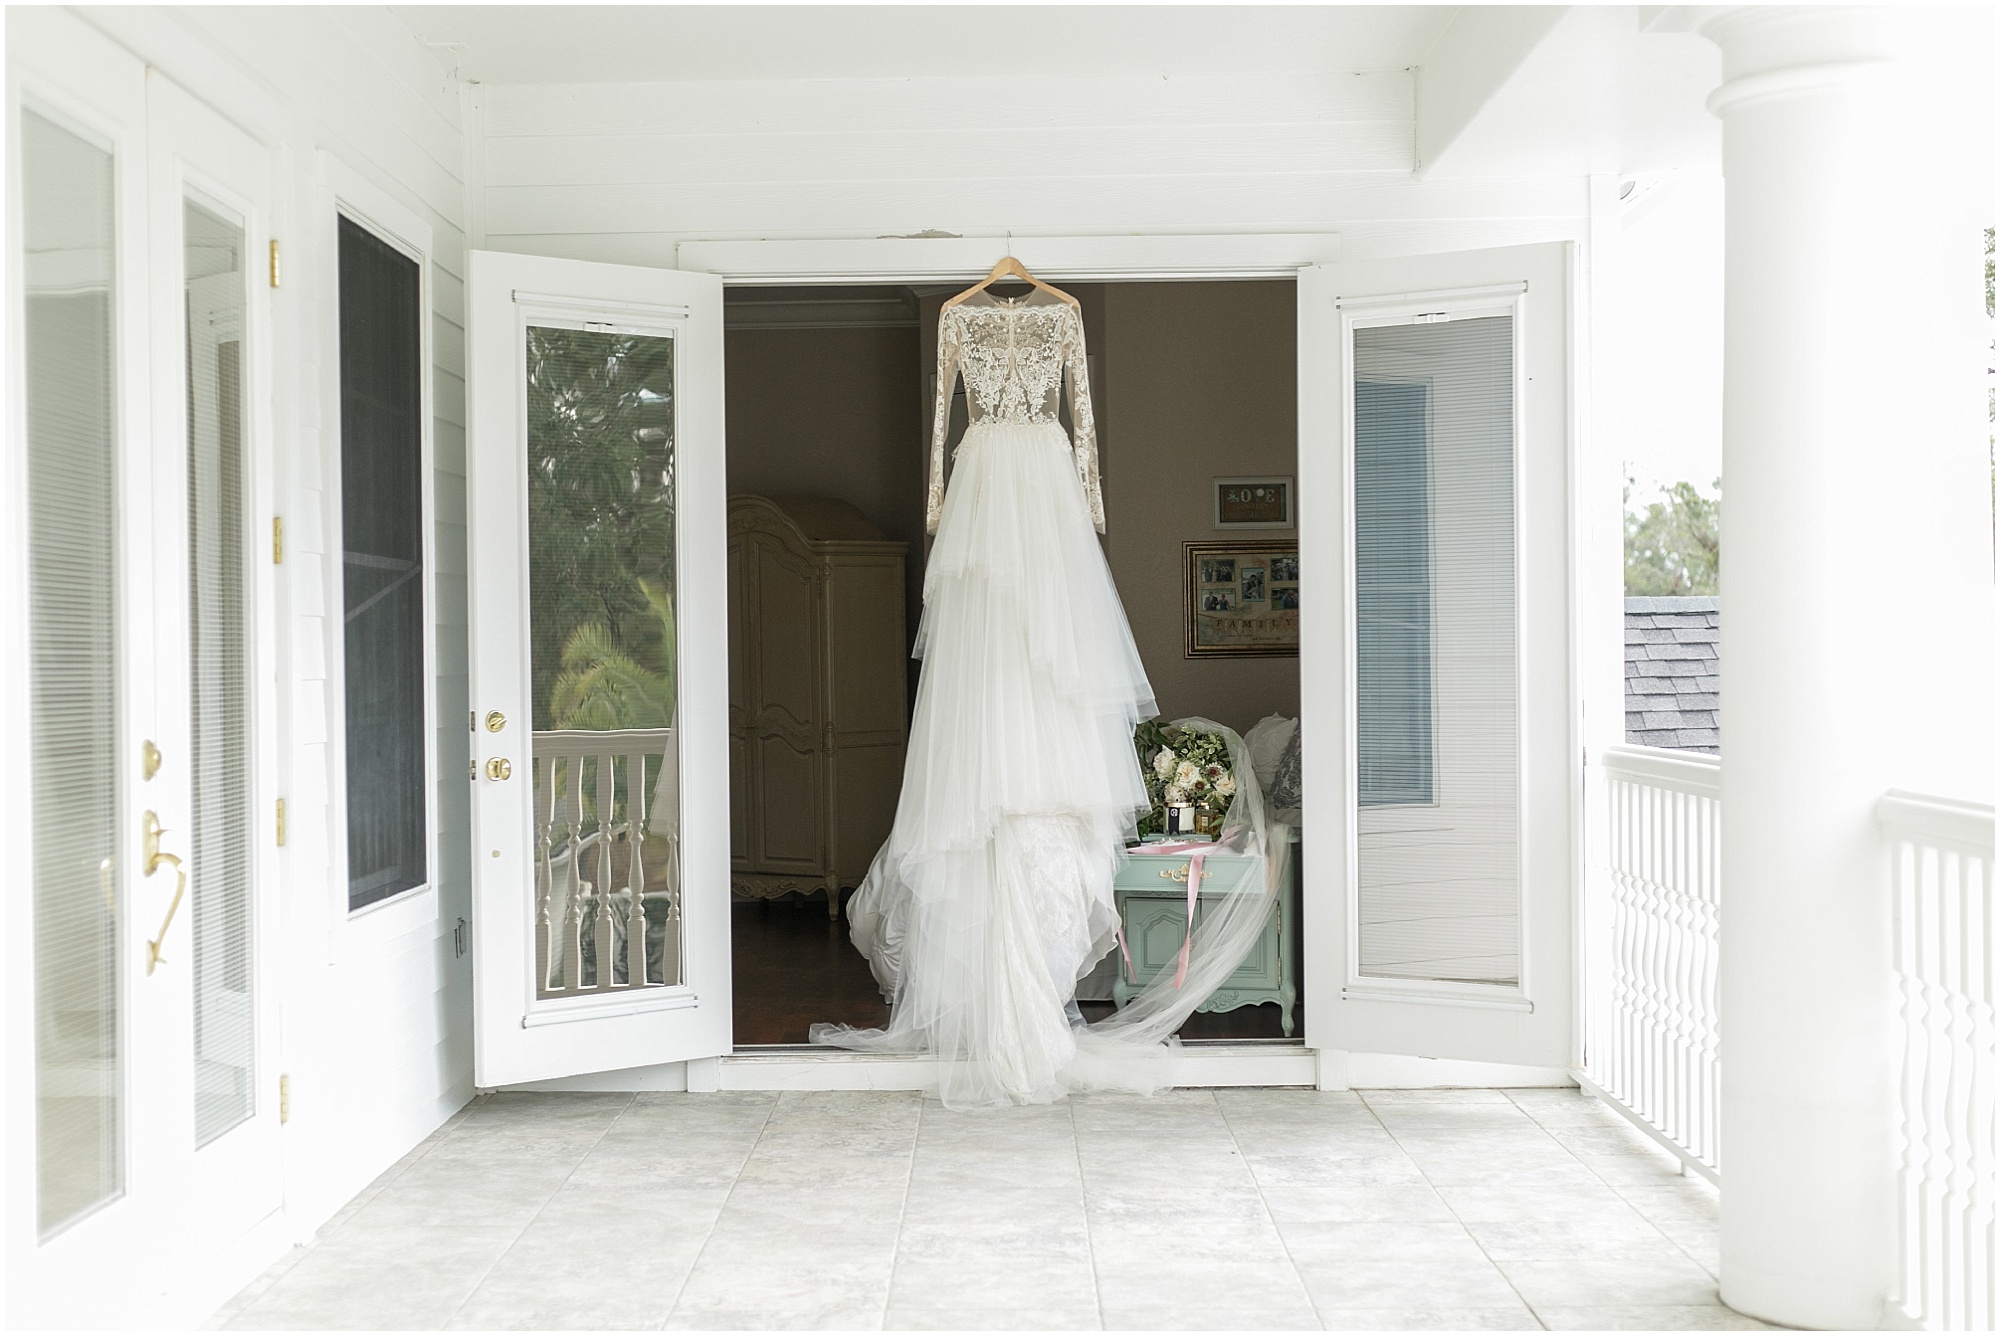 Timeless southern bride's wedding dress hanging on the door outside.